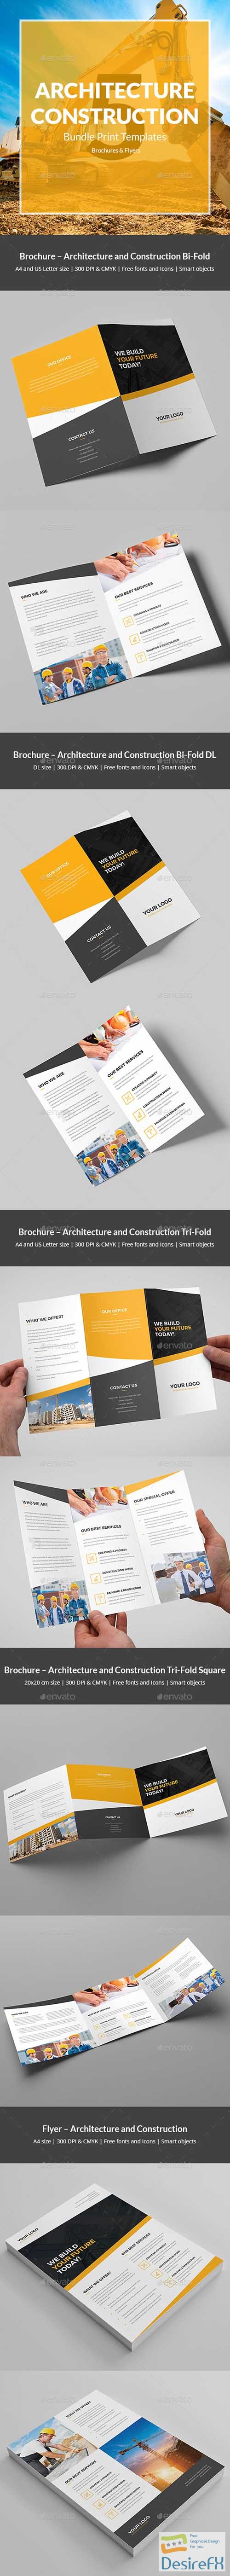 Architecture and Construction – Bundle Print Templates 5 in 1 21330460